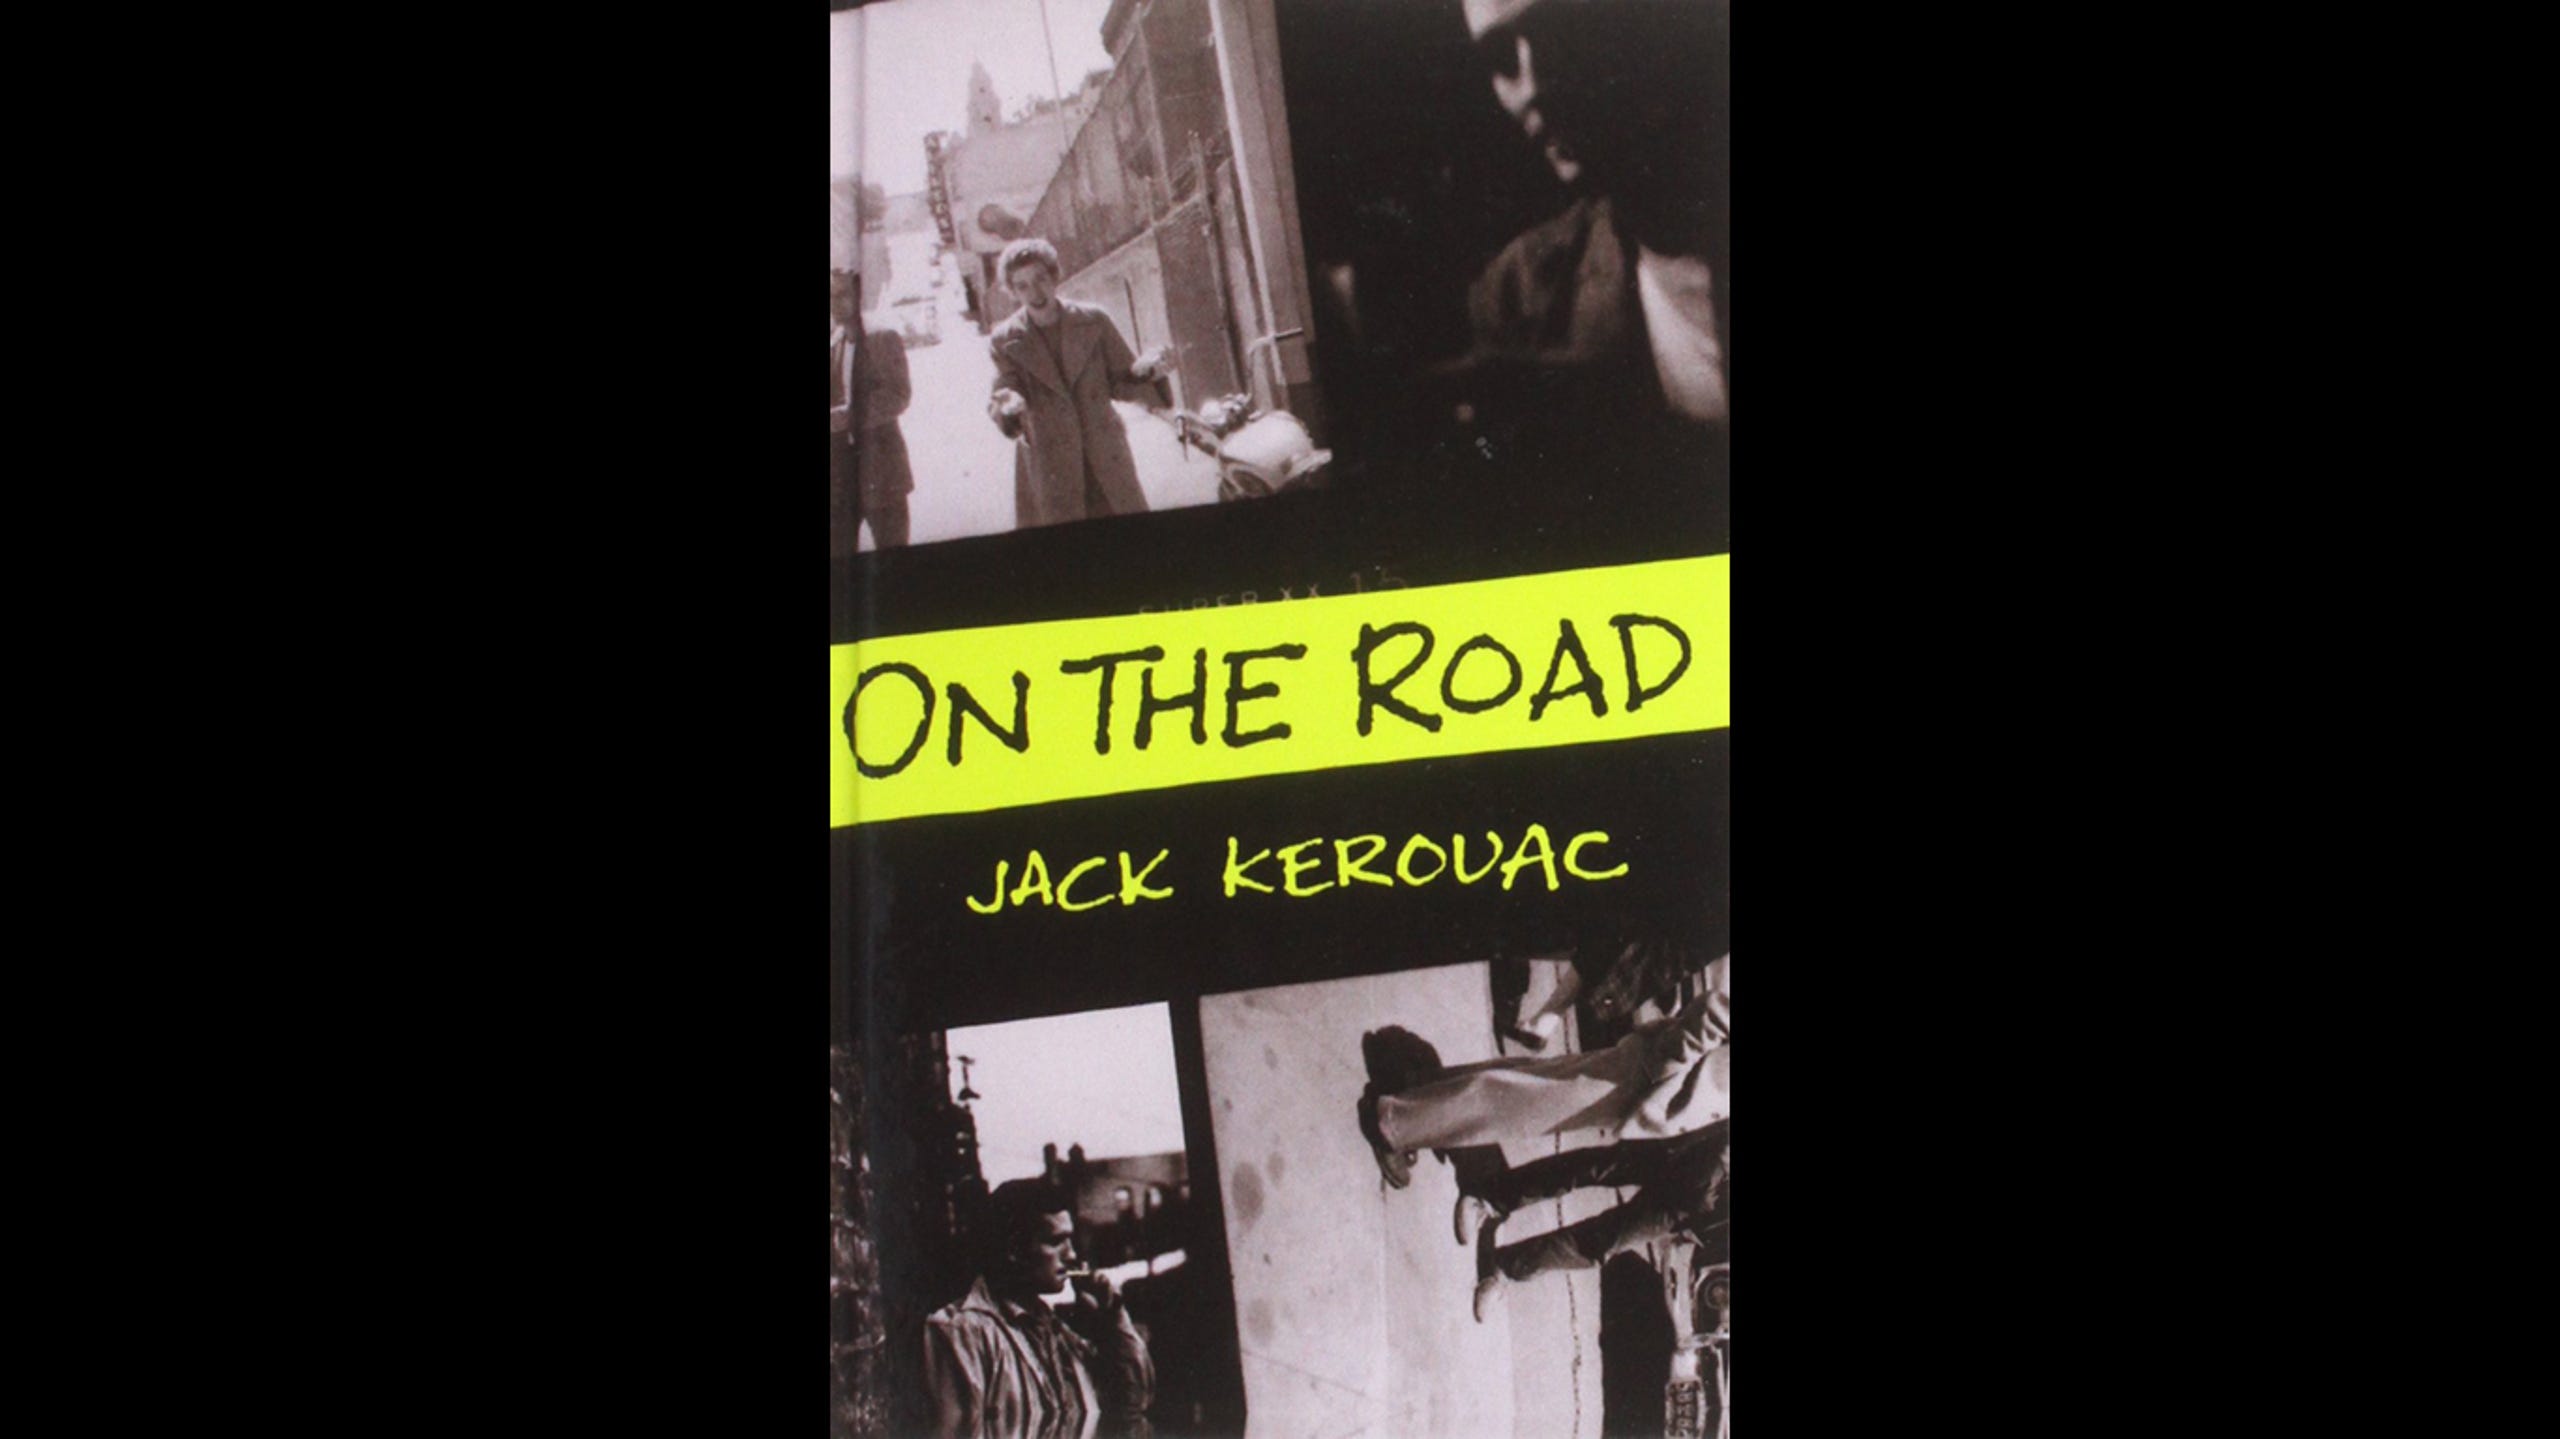 <strong>15. On The Road </strong><strong>• Author:</strong> Jack Kerouac <strong>• Originally published in:</strong> 1957 <strong>• </strong>"On The Road" is based on the travels of the author and his friends across the country. As the main character, Sal Paradise, travels from New York to Colorado – following a friend who had moved there – he discovers a lot about himself and people in general along the way. Uruburu recommends "On the Road" because of "its wonderful style and ability to capture a cultural moment of the endless horizon of American Dreams found and lost by a post-WWII generation."